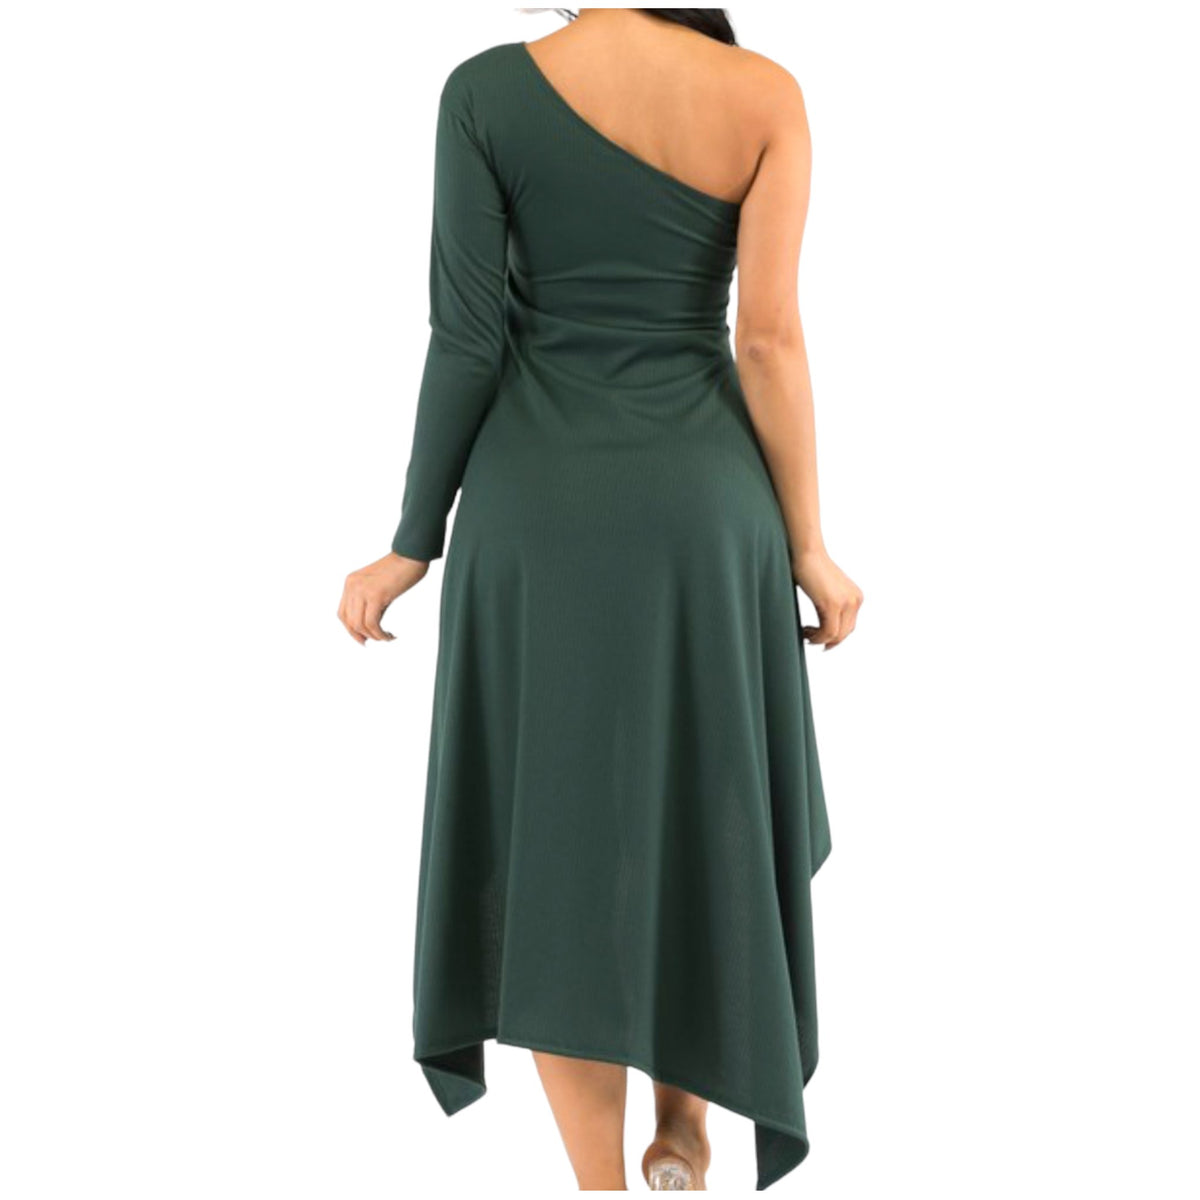 Plus Size Women’s Emerald Green One Shoulder Dress - Fabulously Dressed Boutique 